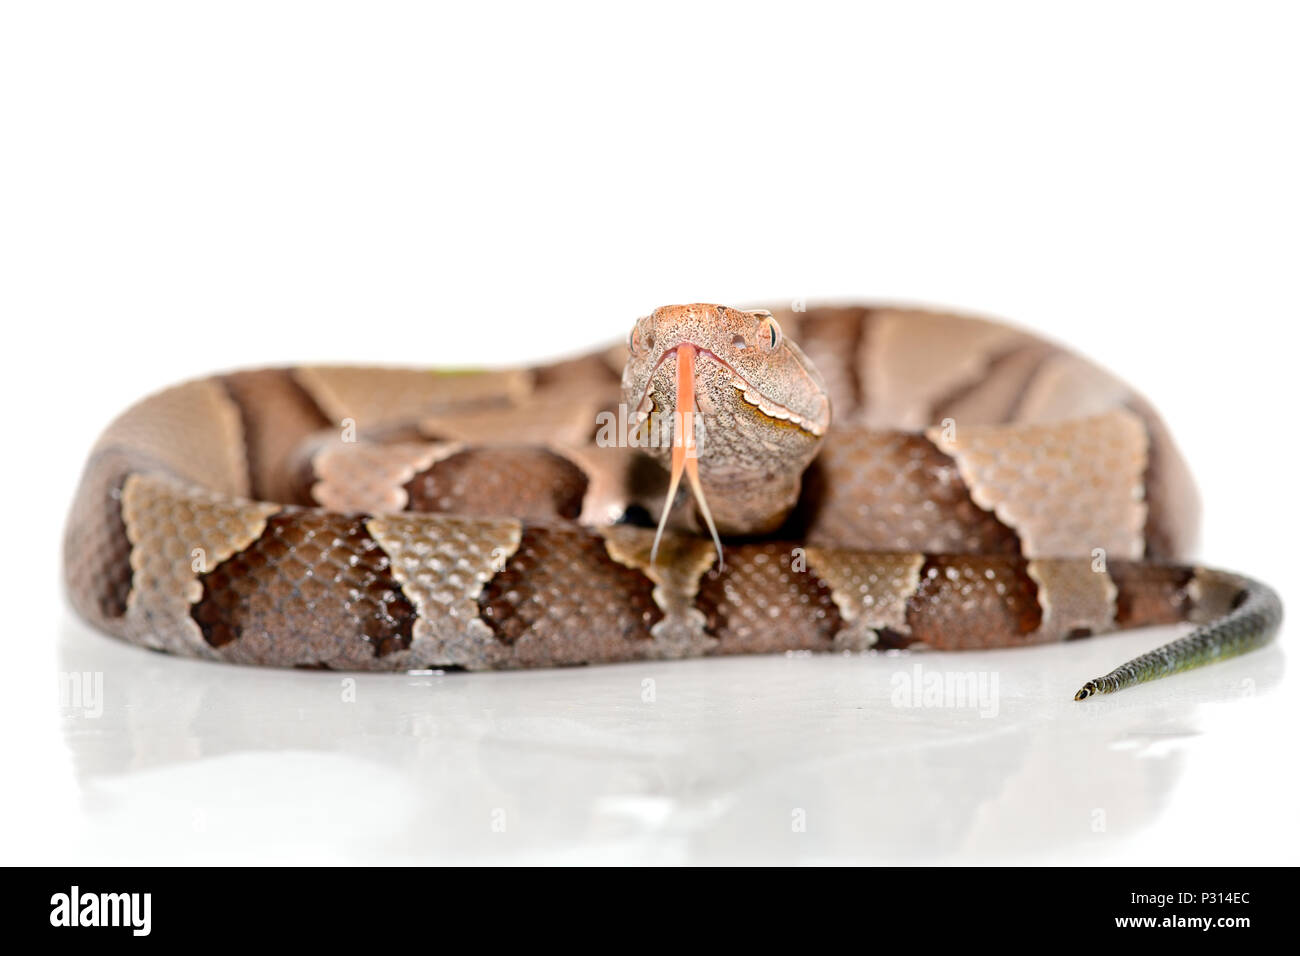 eastern Copperhead (Agkistrodon contortrix) close-up on white background. Stock Photo